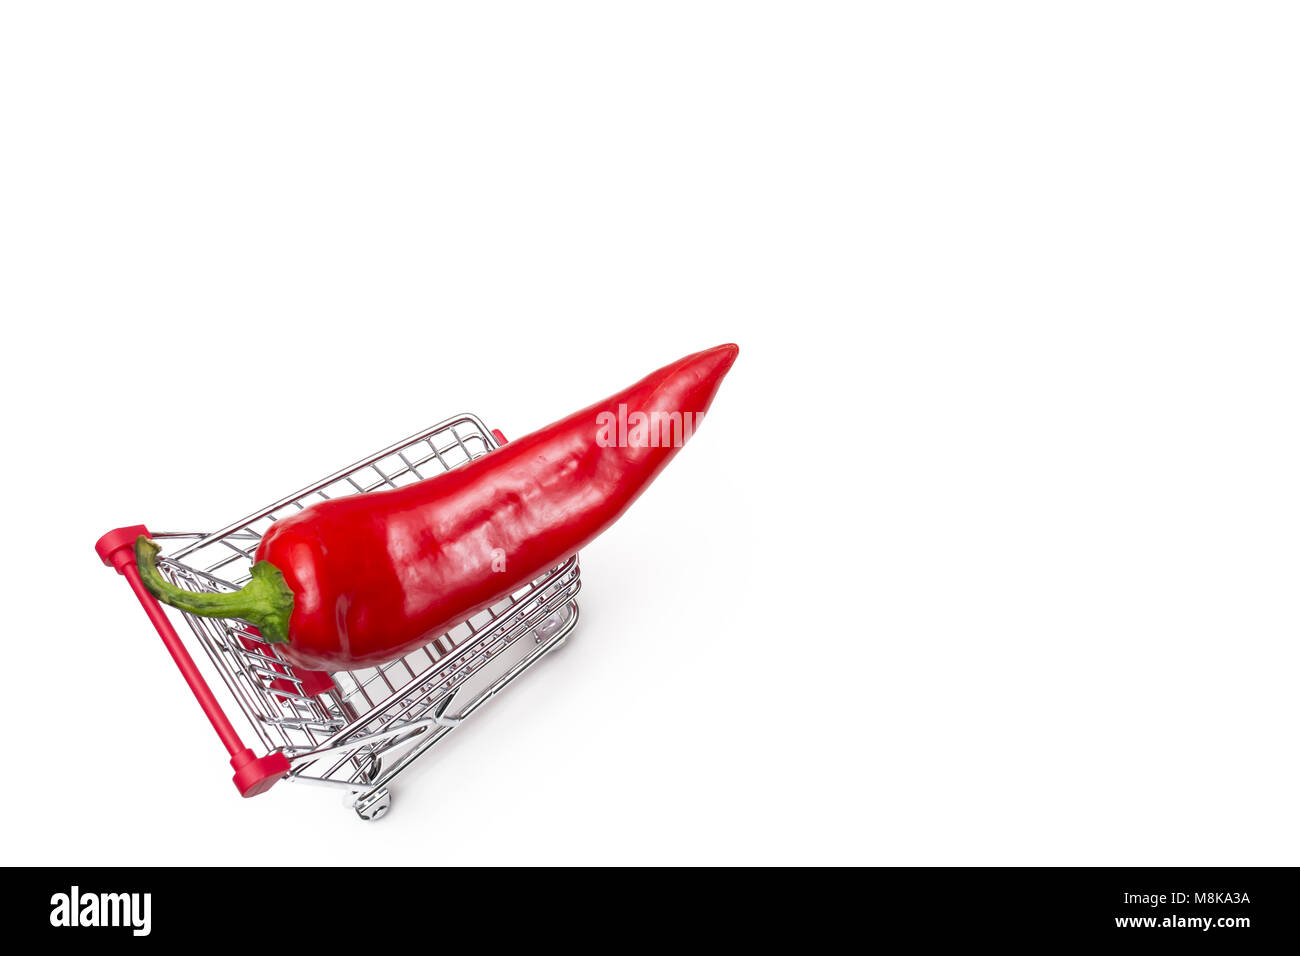 Buying a peppers from supermarket, Pepper in shopping cart,shoping cart isolated on white background Stock Photo